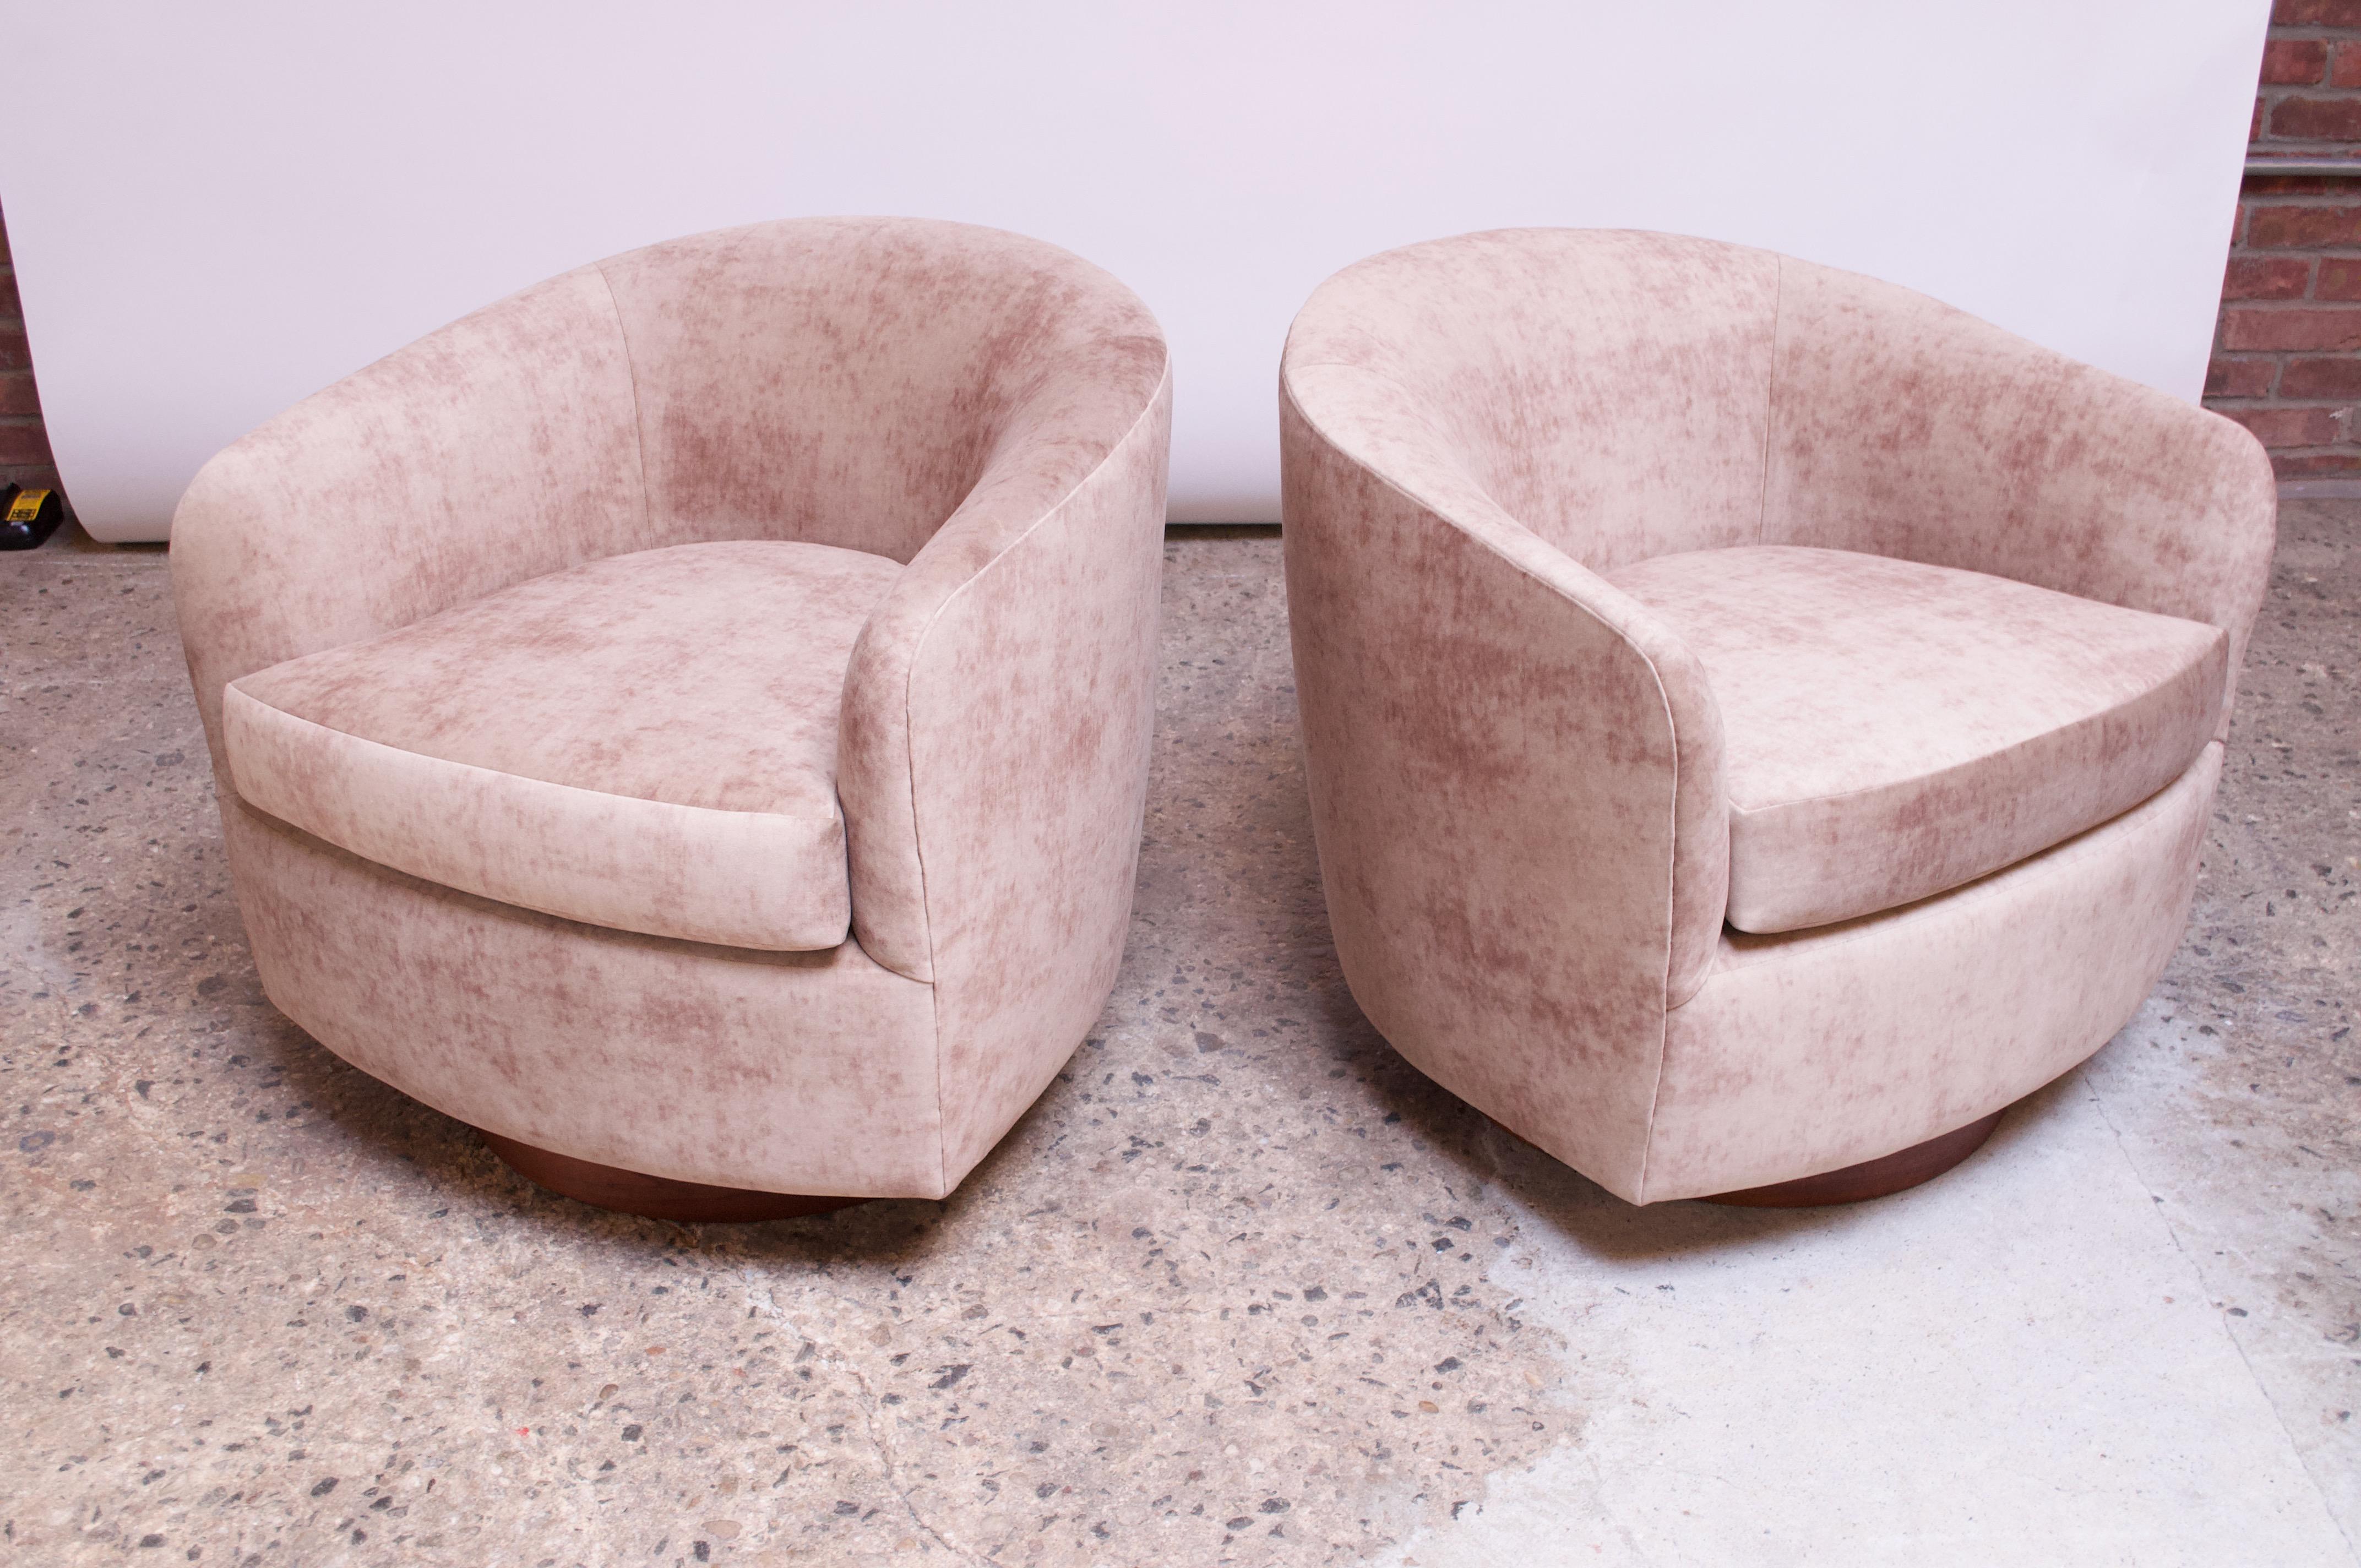 These 1960s Milo Baughman for Thayer Coggin barrel back swivel chairs feature the signature walnut swivel / tilt base. The seats are newly recovered in a mottled blush suede known as 